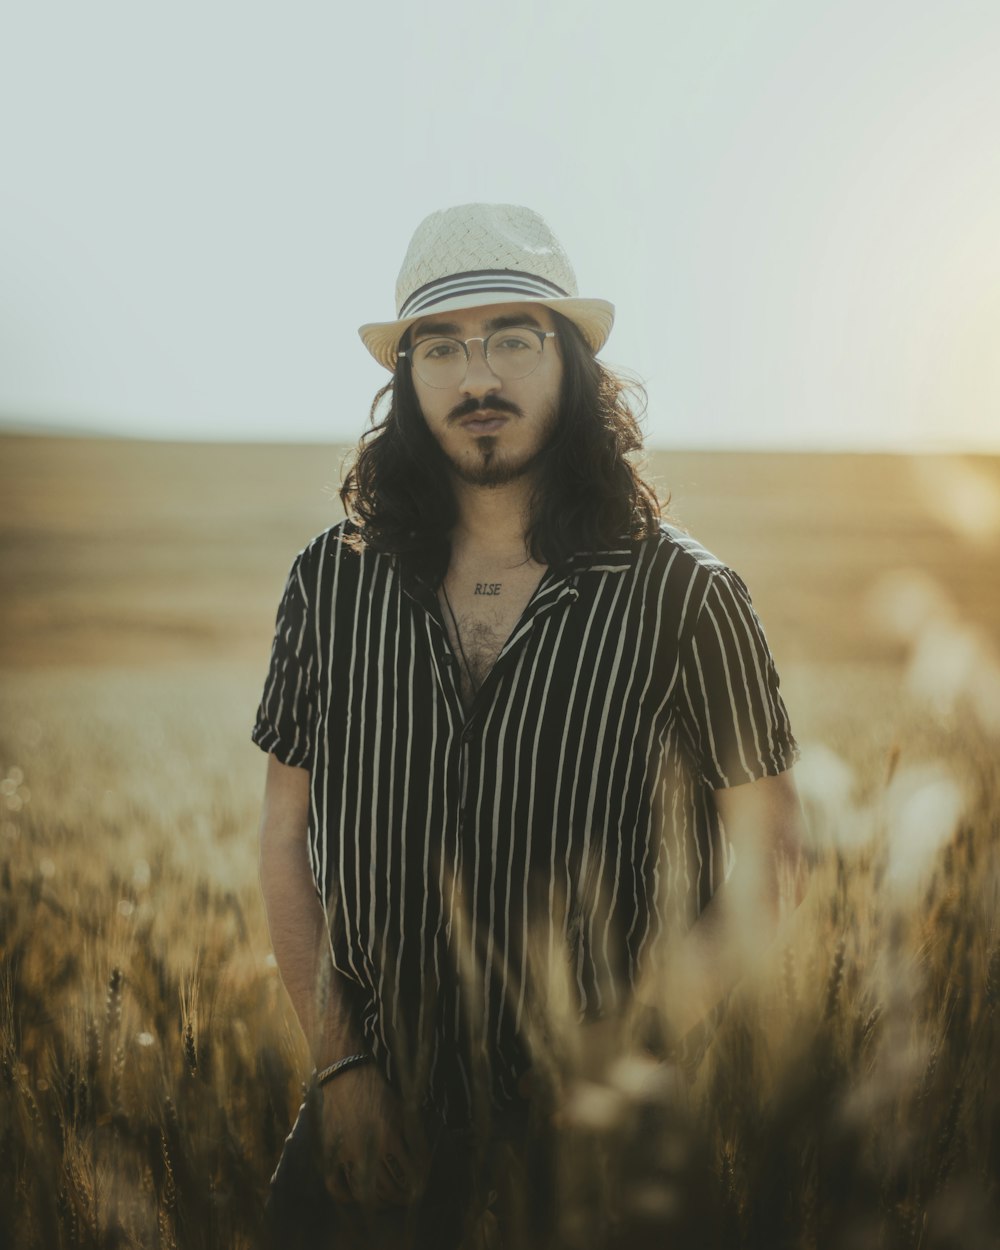 a person with long hair and a hat standing in a field